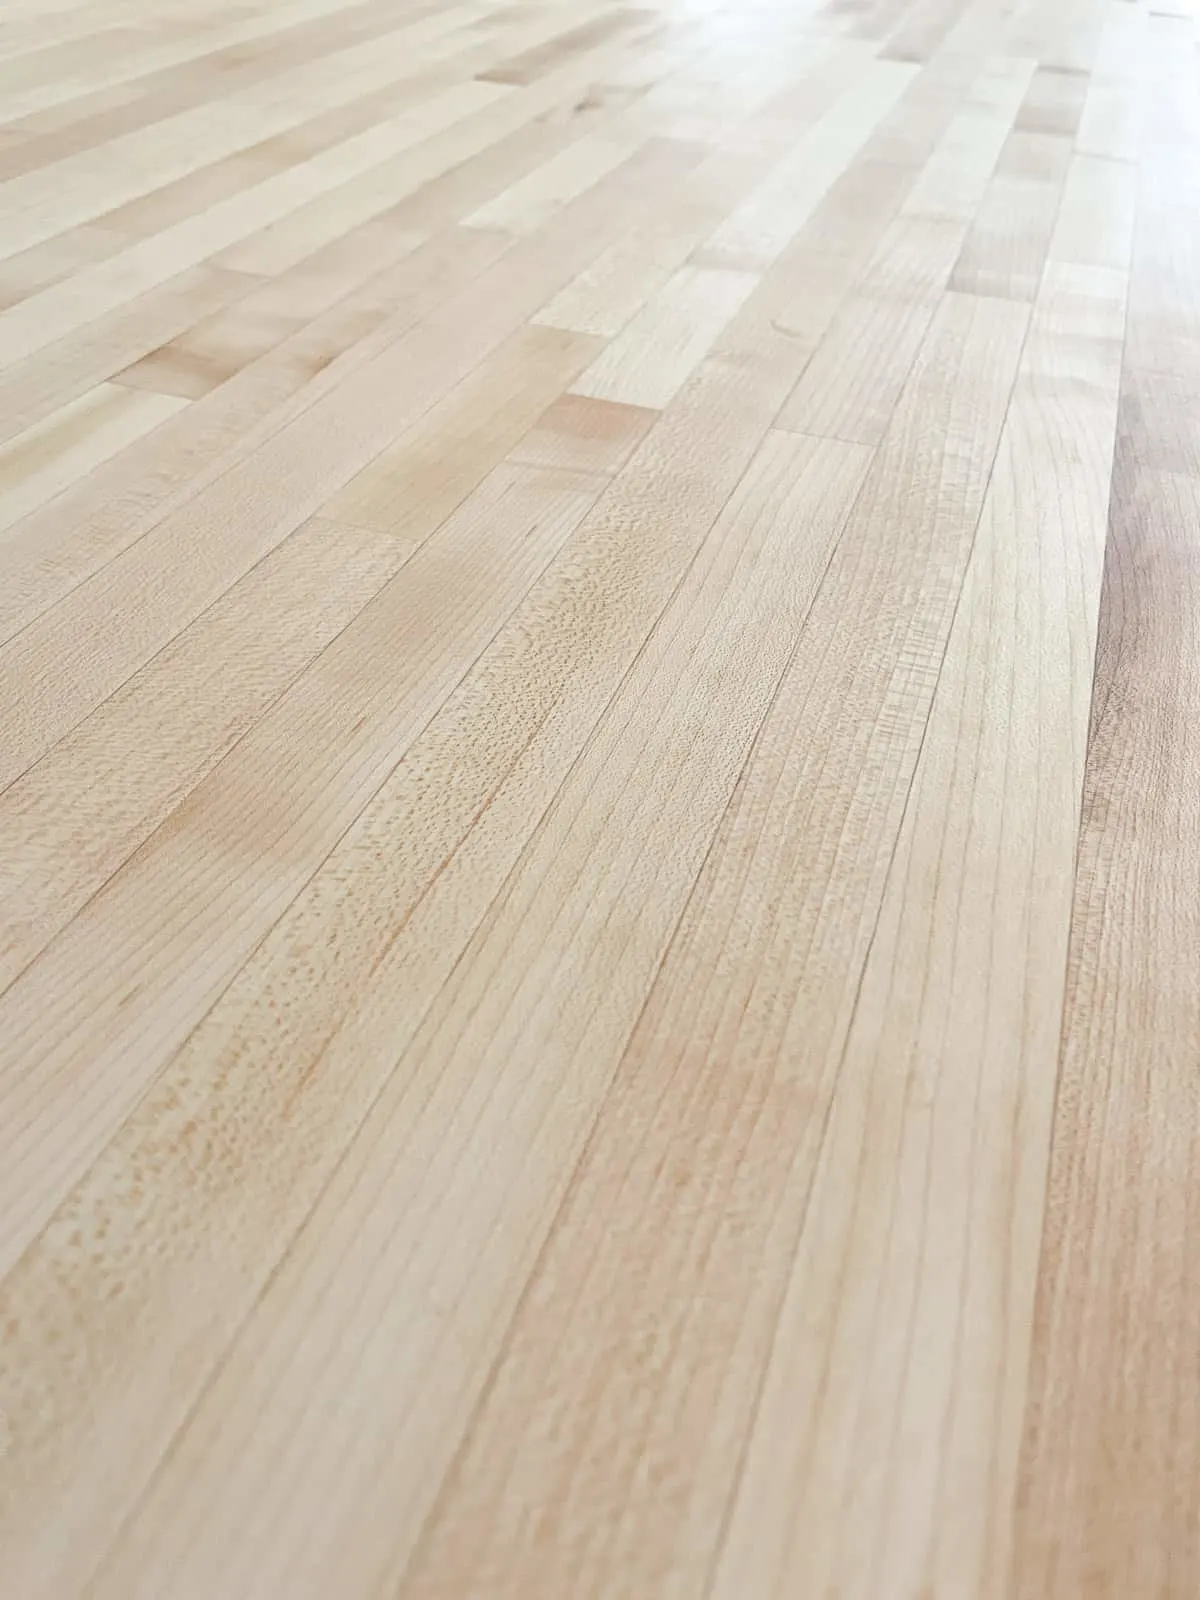 maple butcher block countertop sealed with Walrus Oil